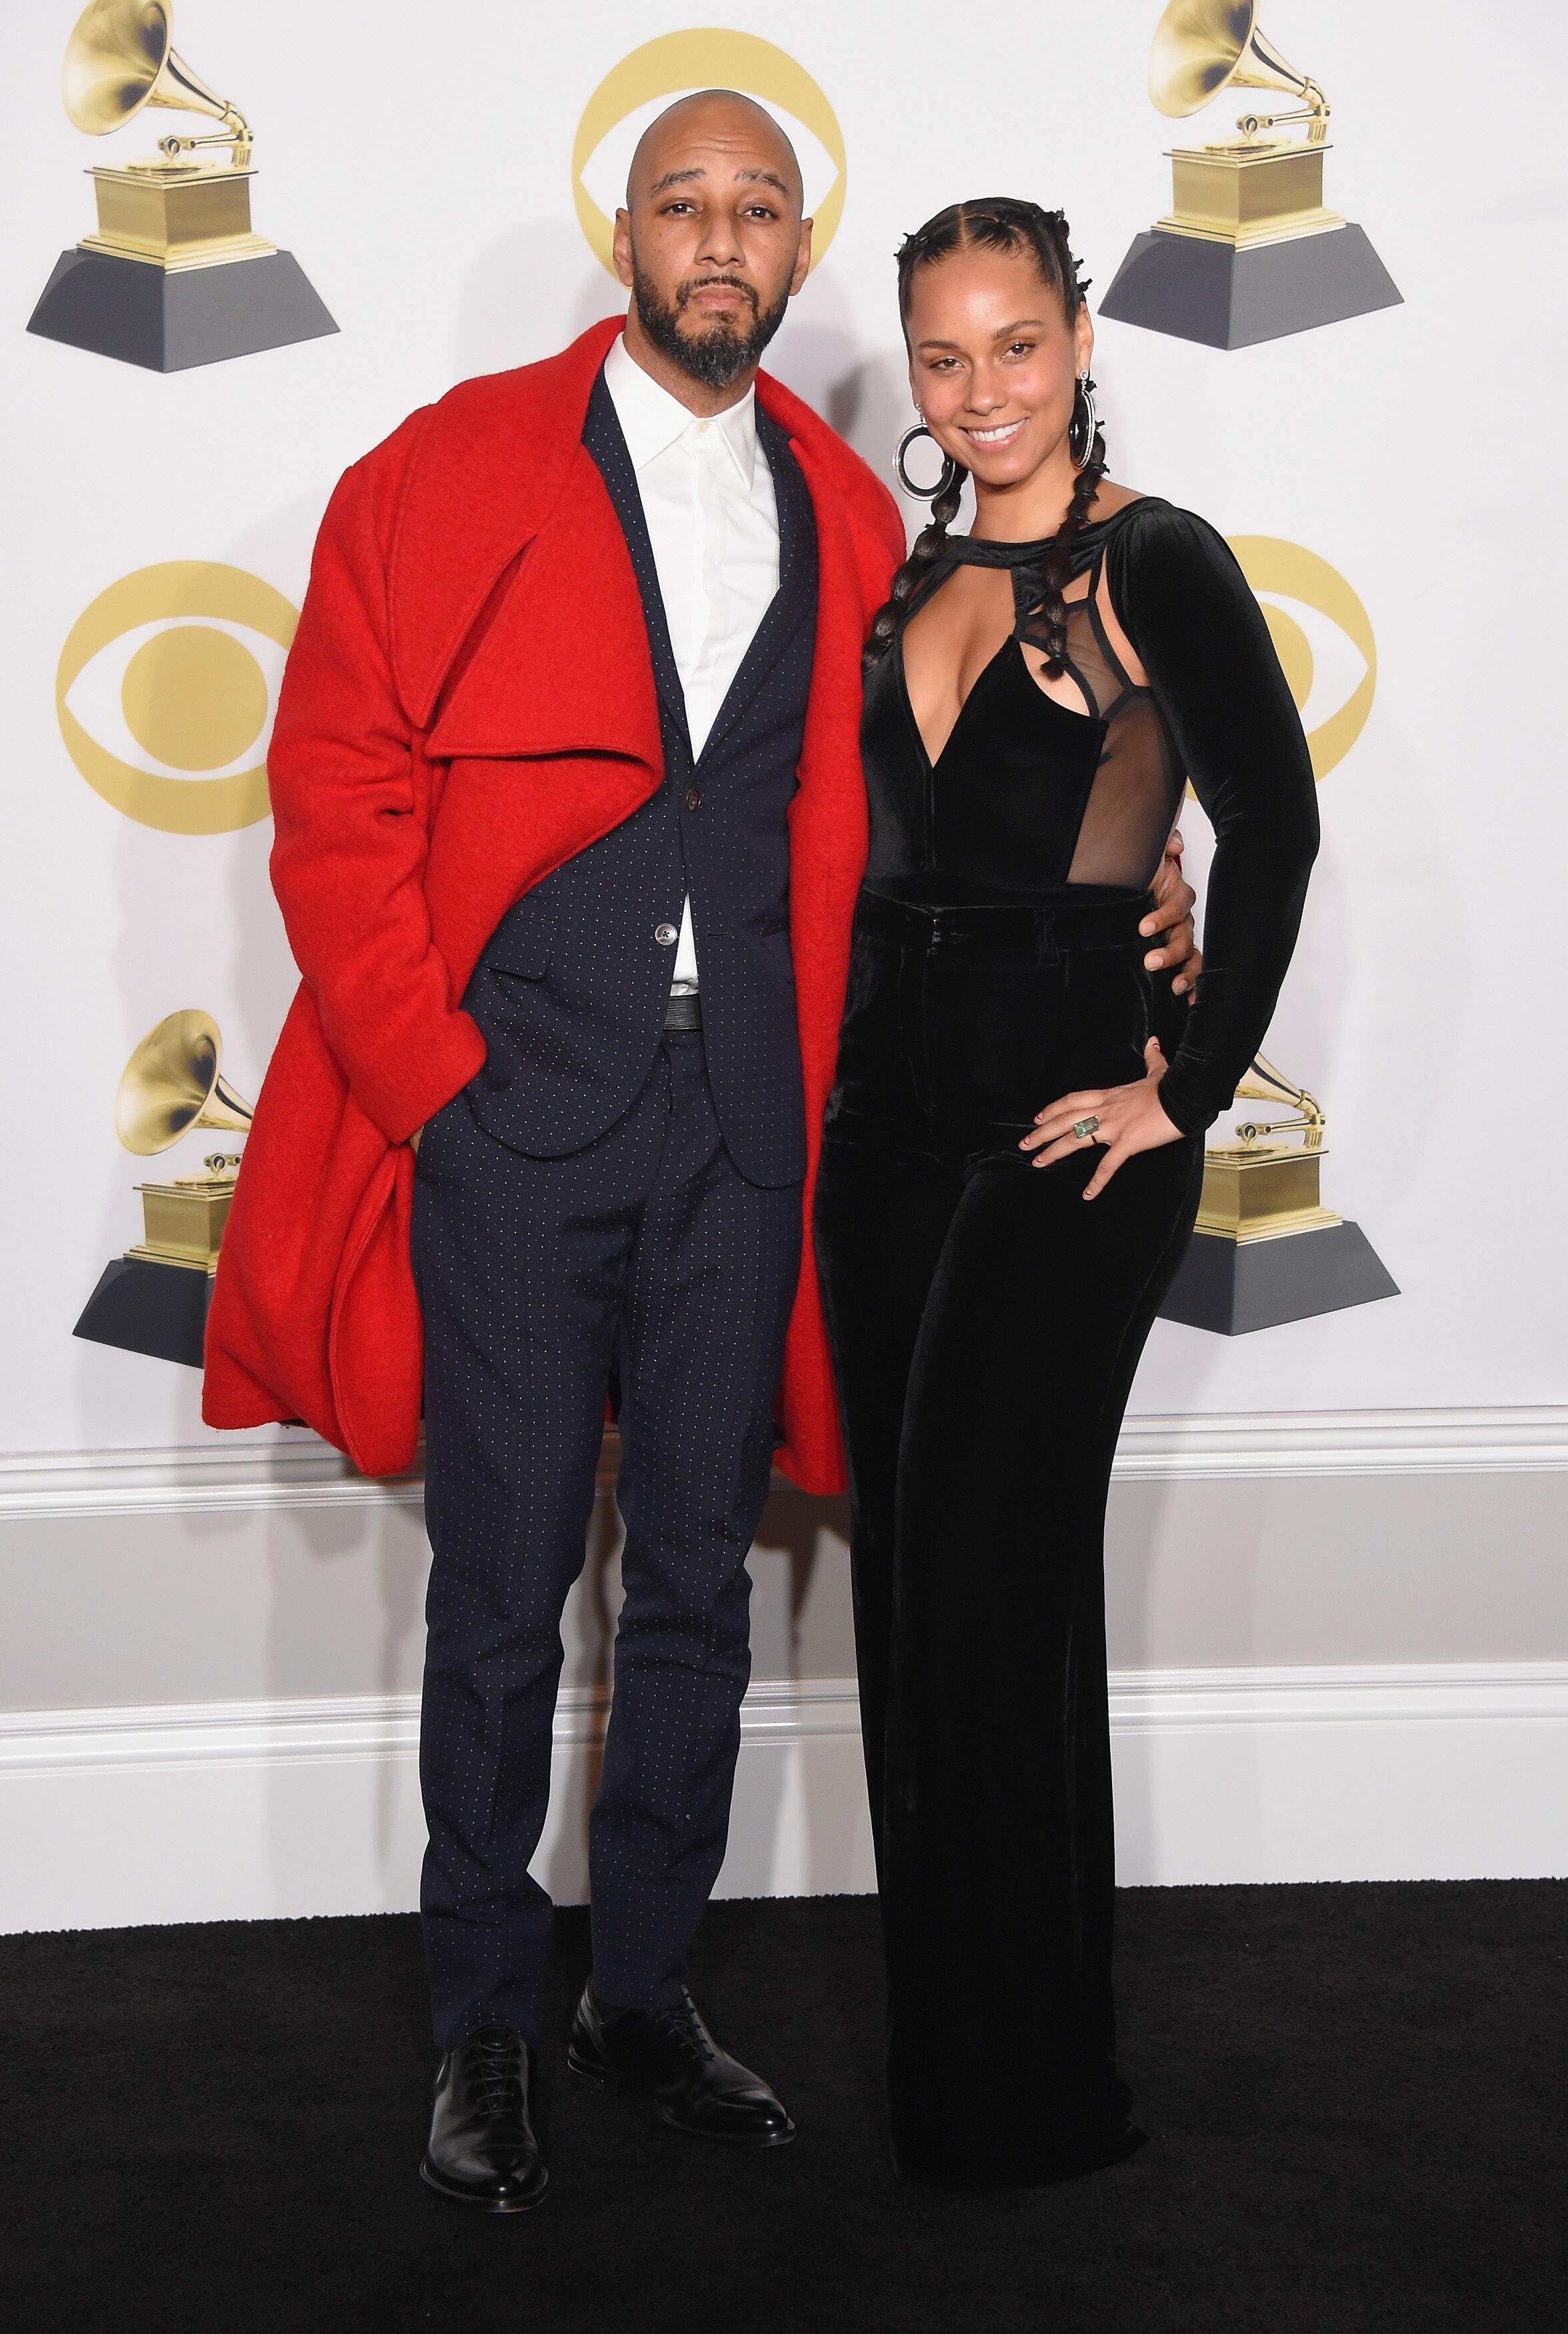 Swizz Beatz and Alicia Keys at the 60th Annual GRAMMY Awards in 2018 | Source: Getty Images